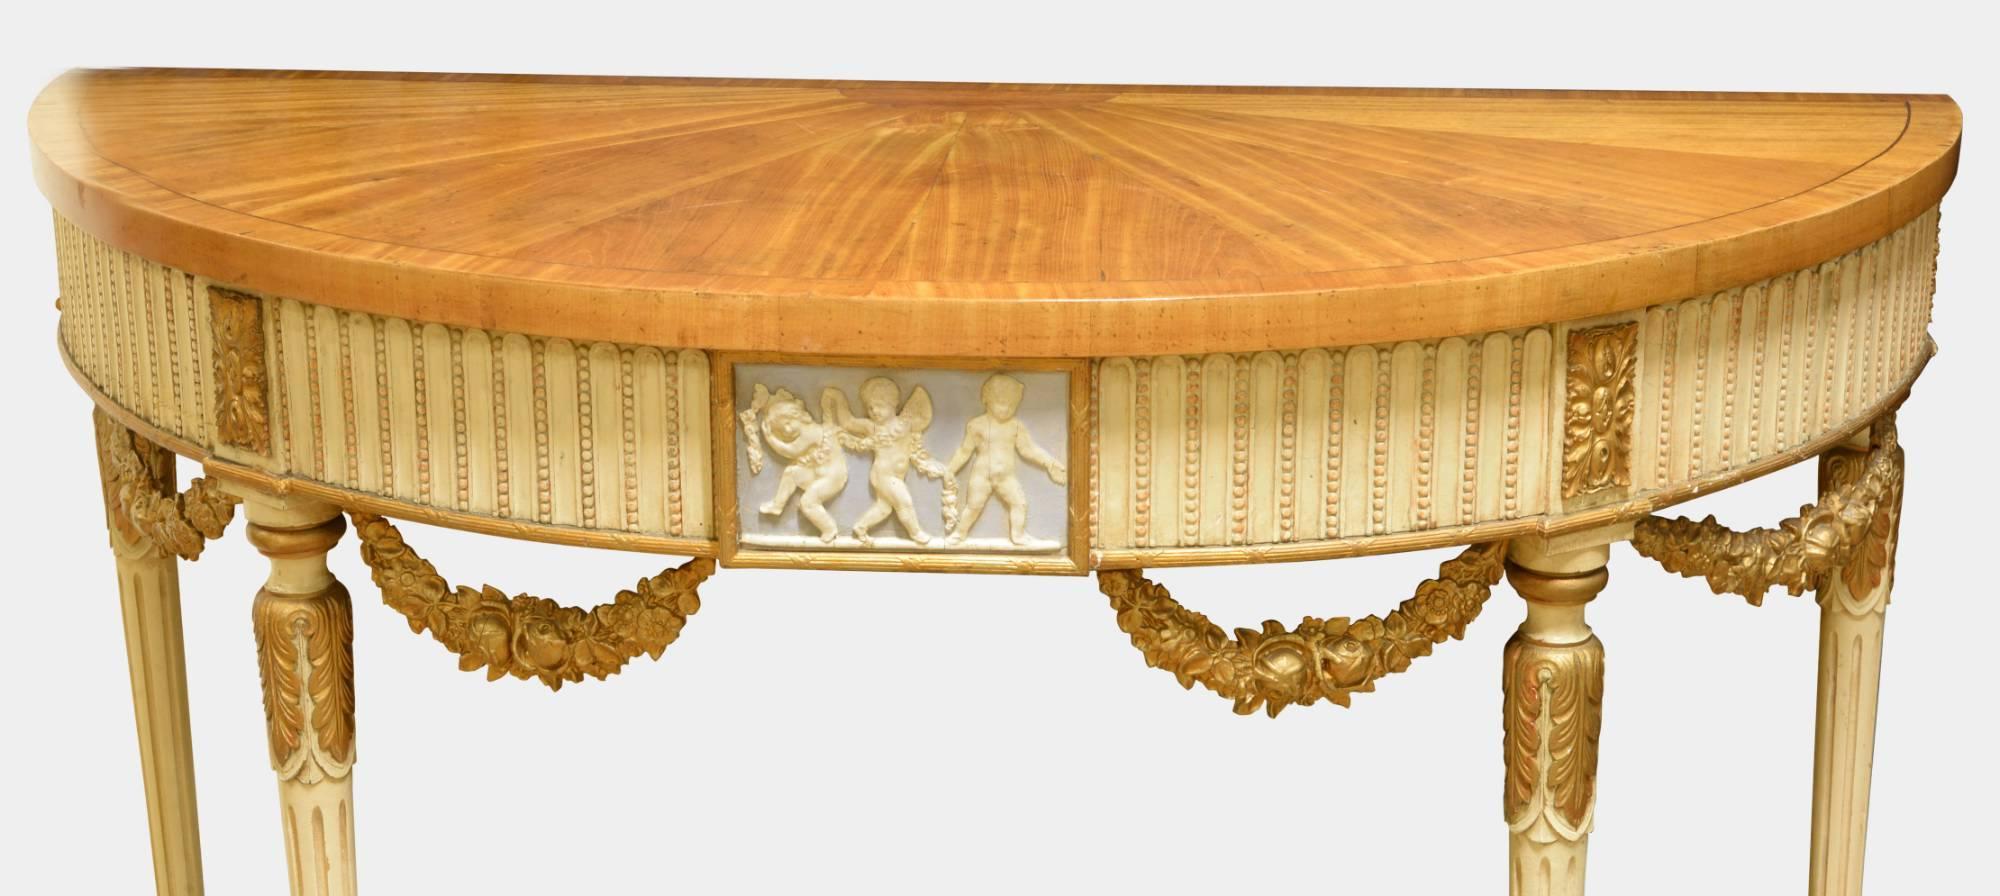 A decorative pair of French console tables with segmented satinwood tops and original parcel-gilt painted bases. Wedgewood style inserts,

circa 1920.